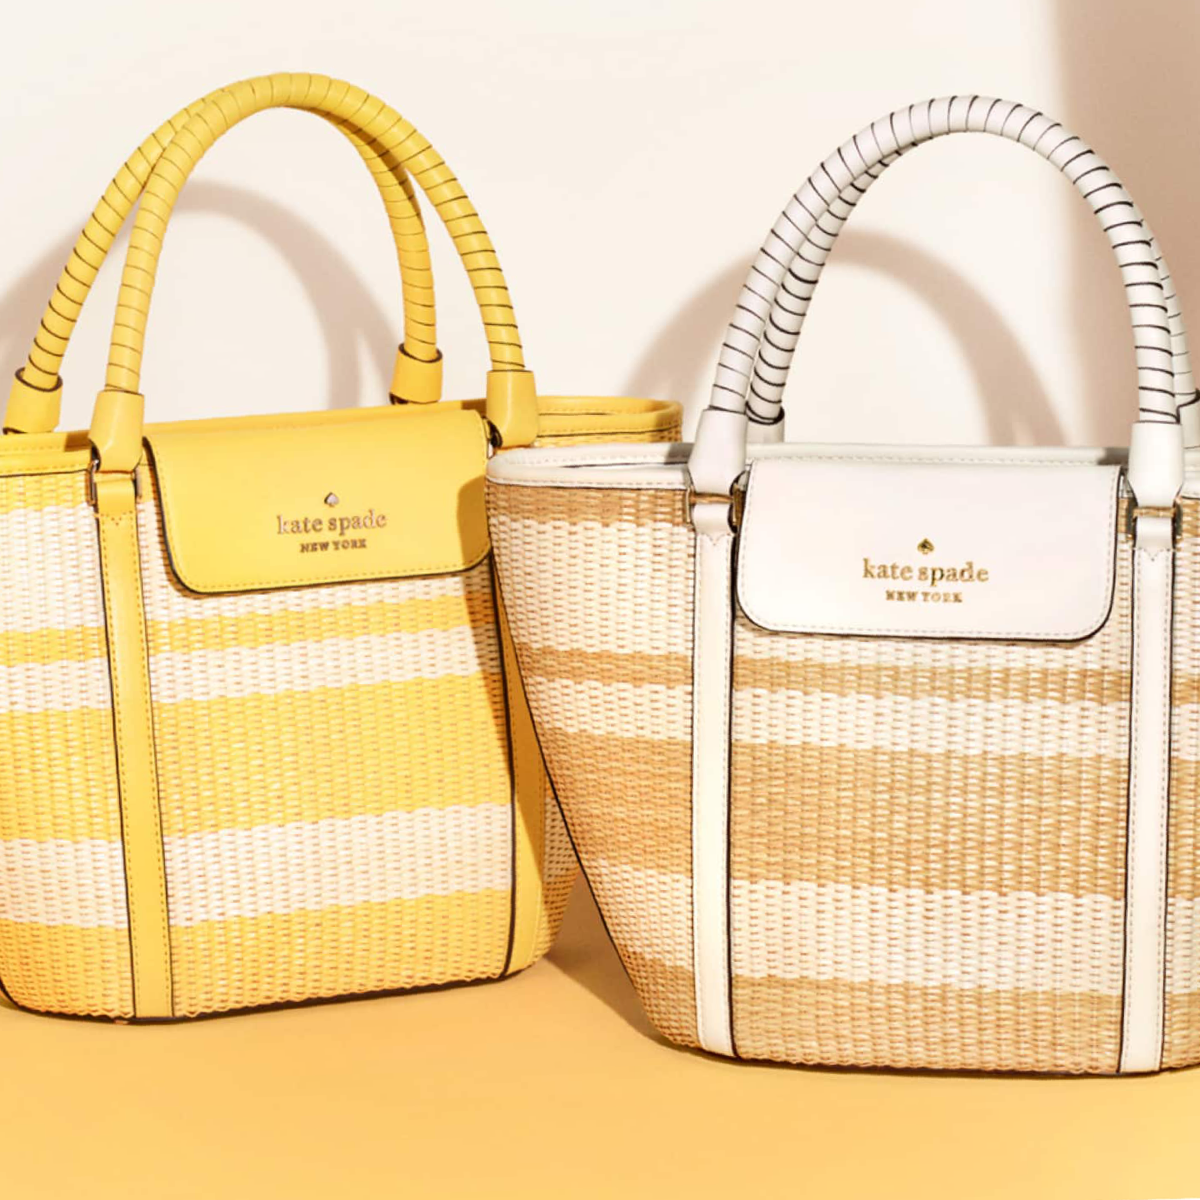 Snag one of these cute Kate Spade bags for only $69 before they're